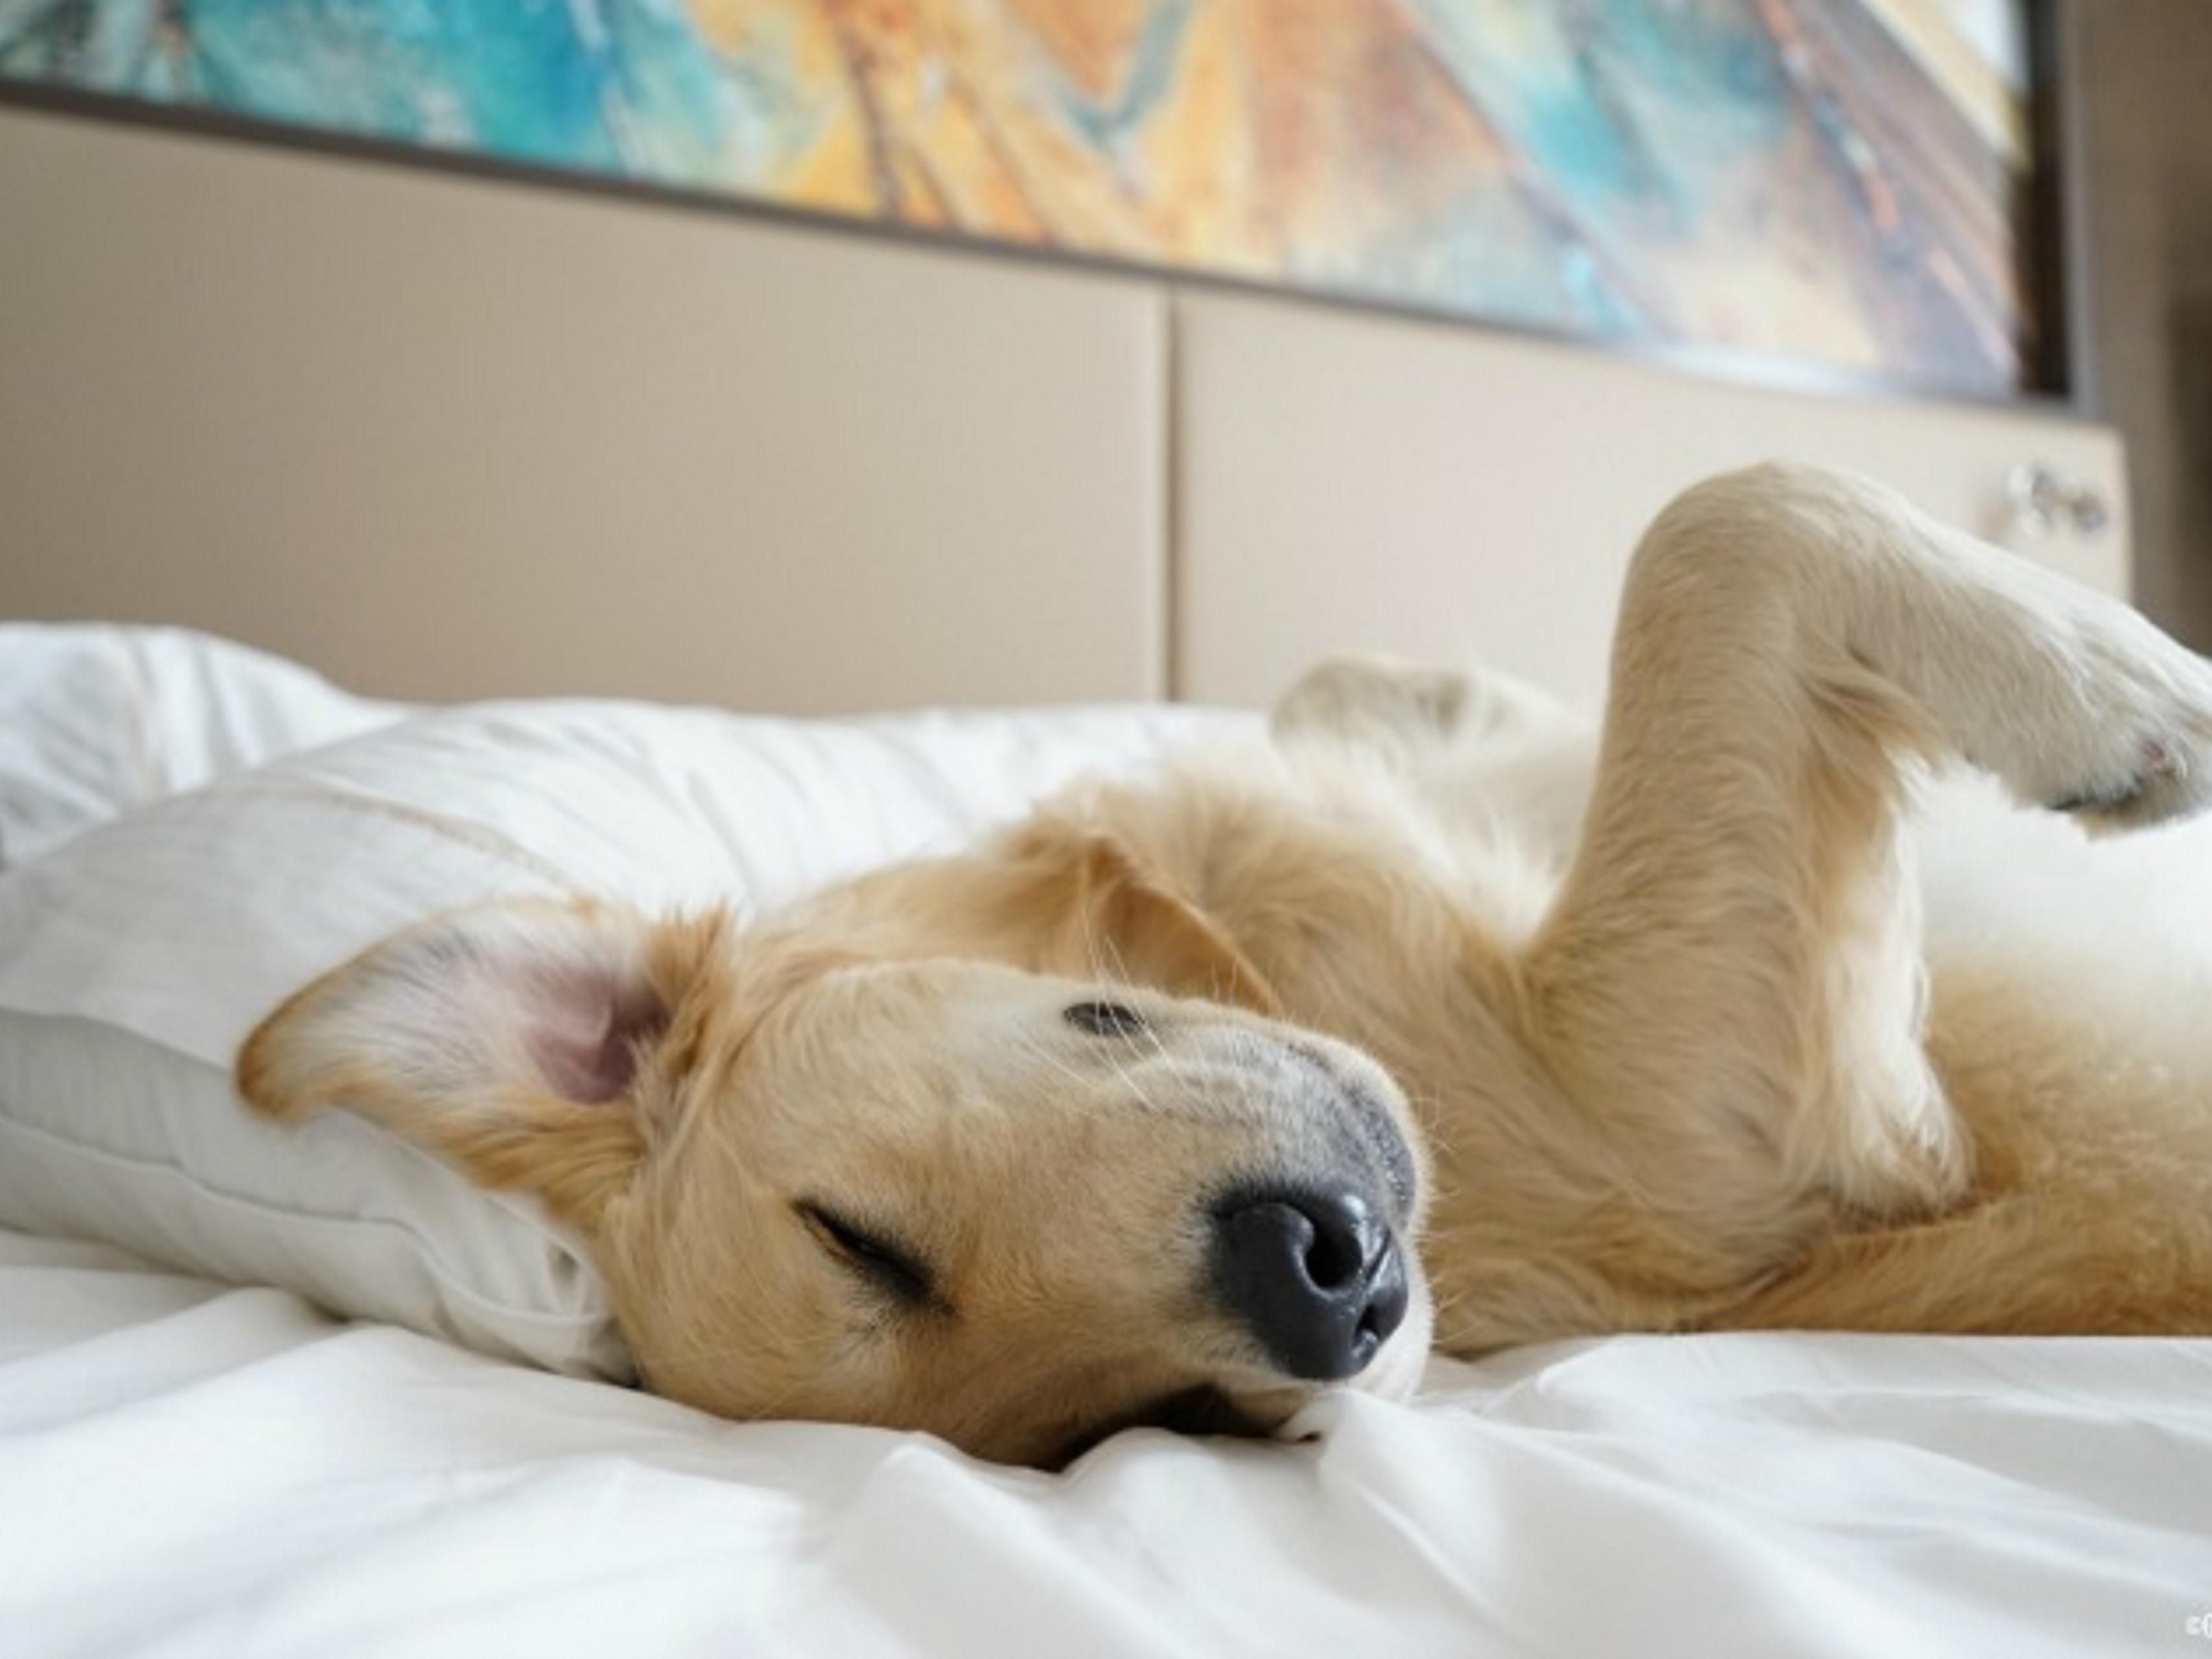 Traveling with Fido or another furry friend? We are a pet-friendly hotel with a great outdoor walking area. $40 daily fee applies per pet (max of two pets allowed).